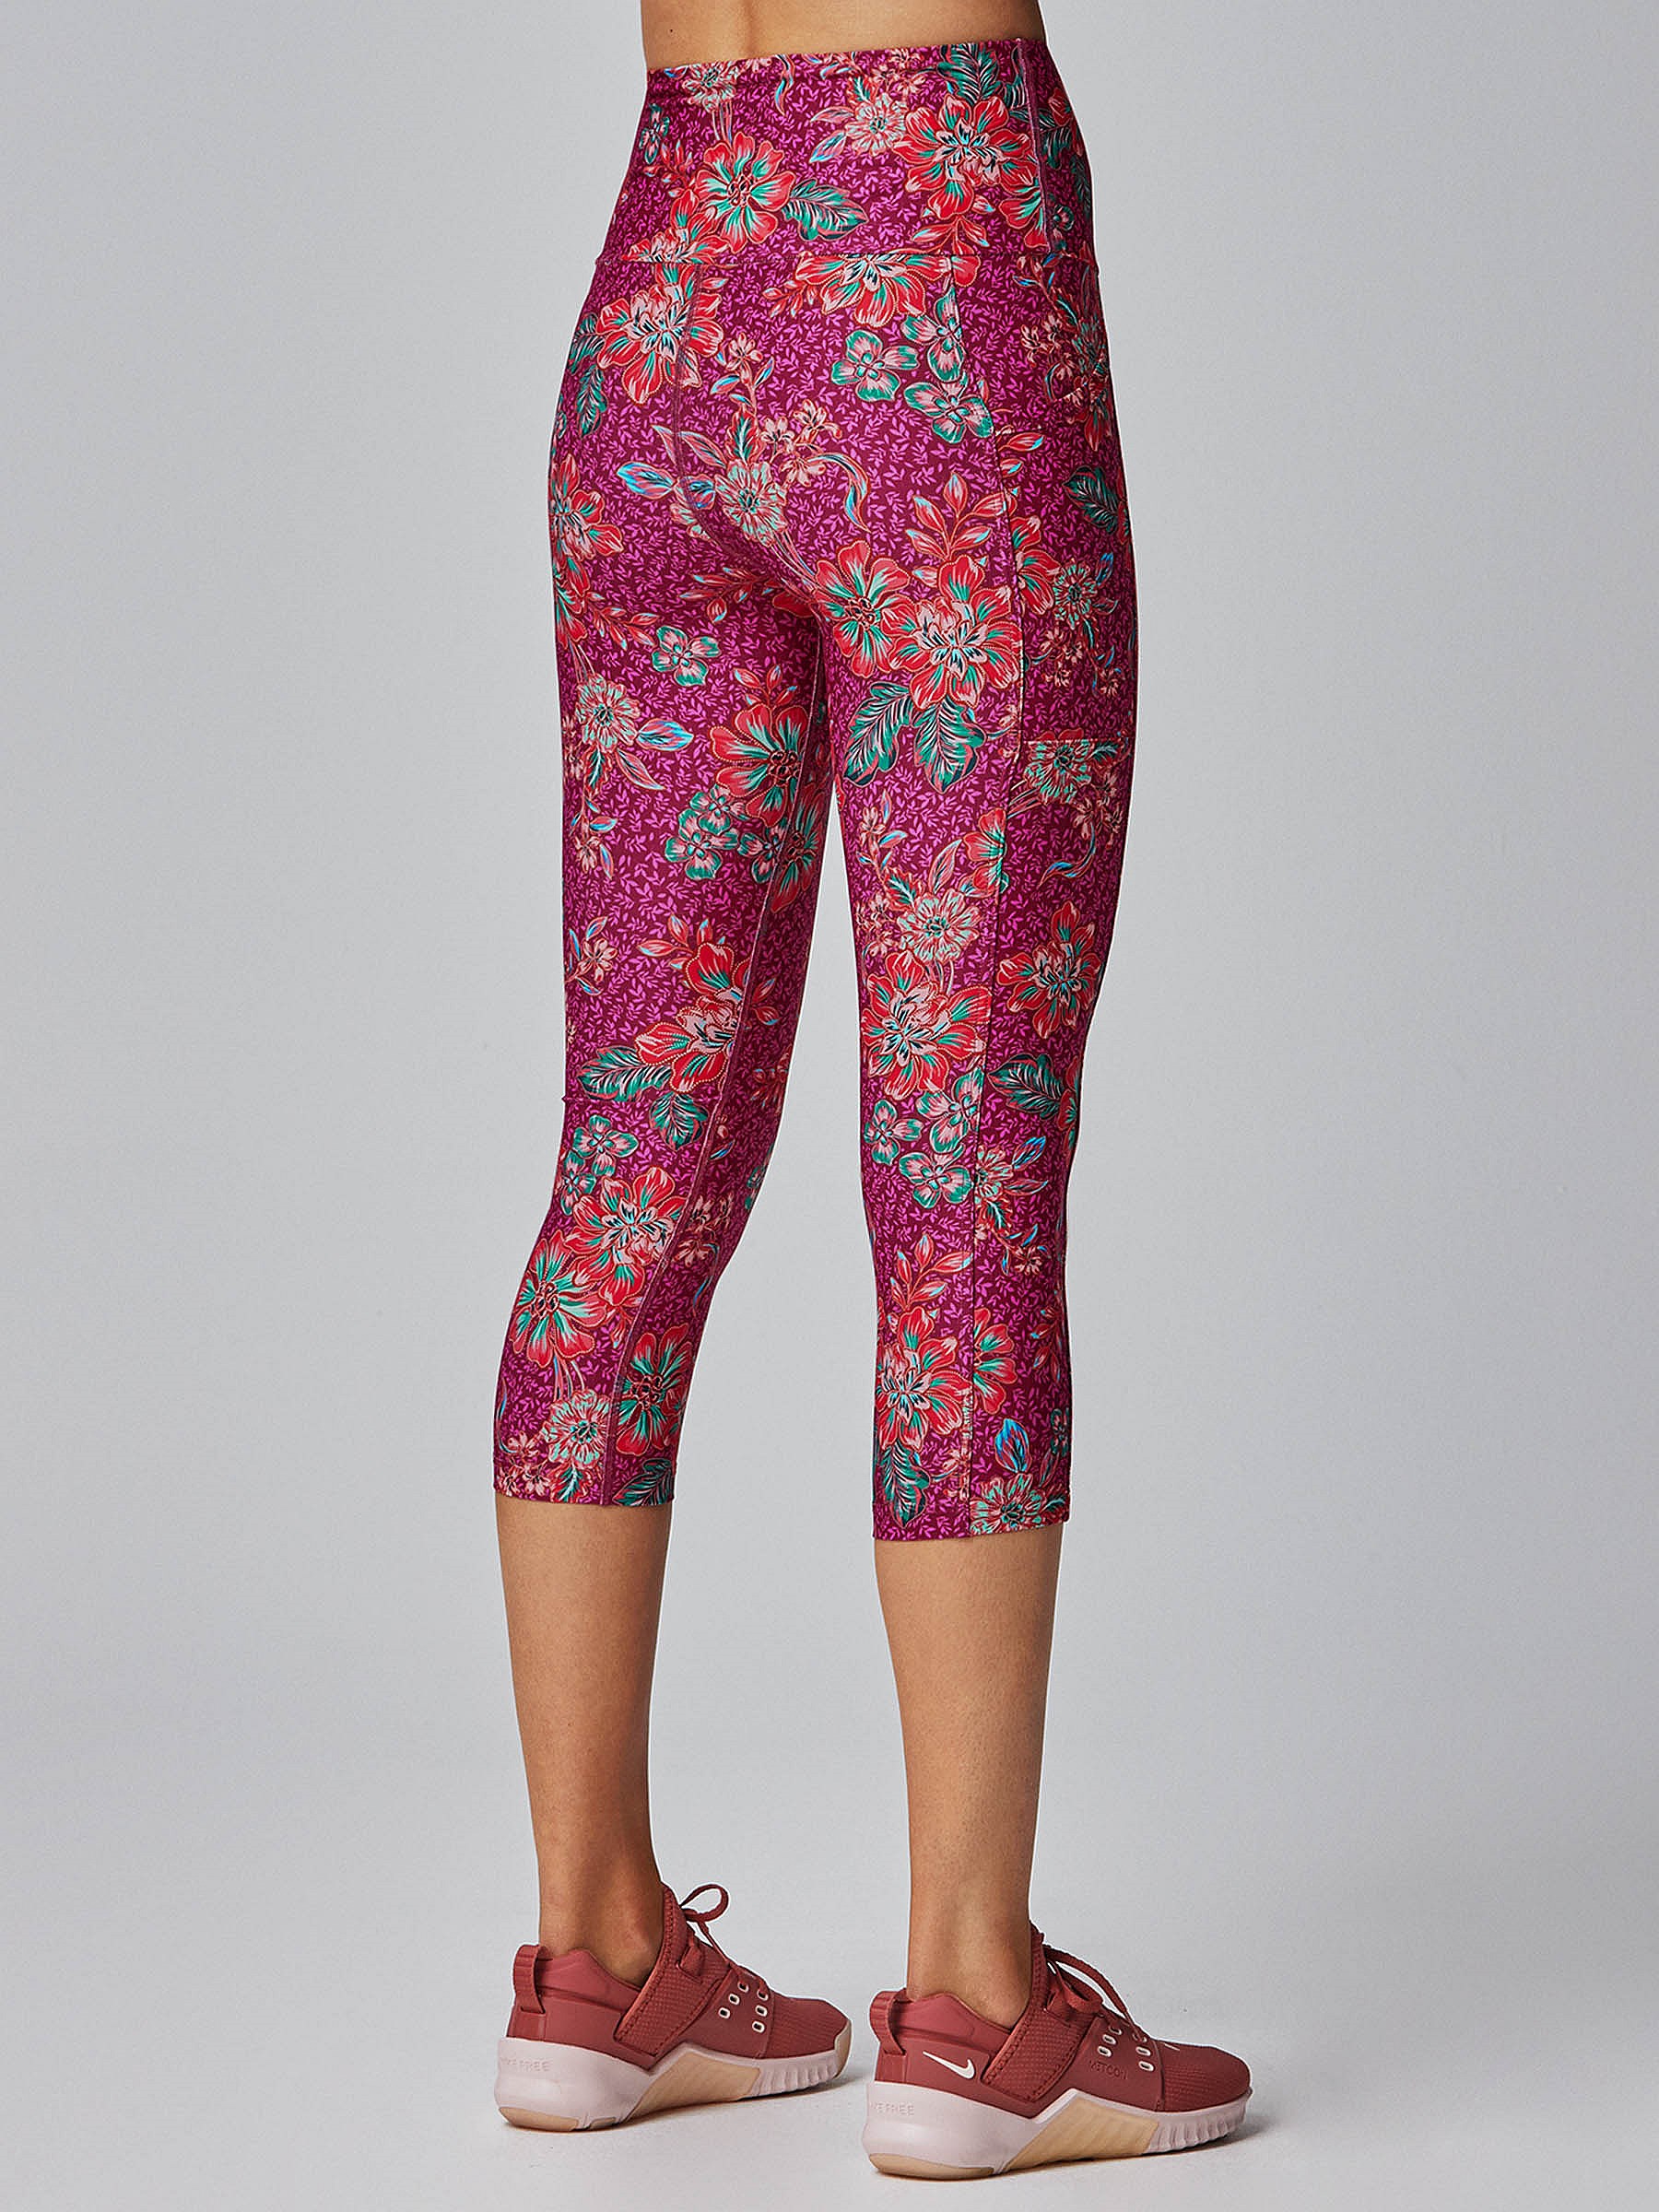 Running Bare Womens Leggings & 3/4 Workout Tights